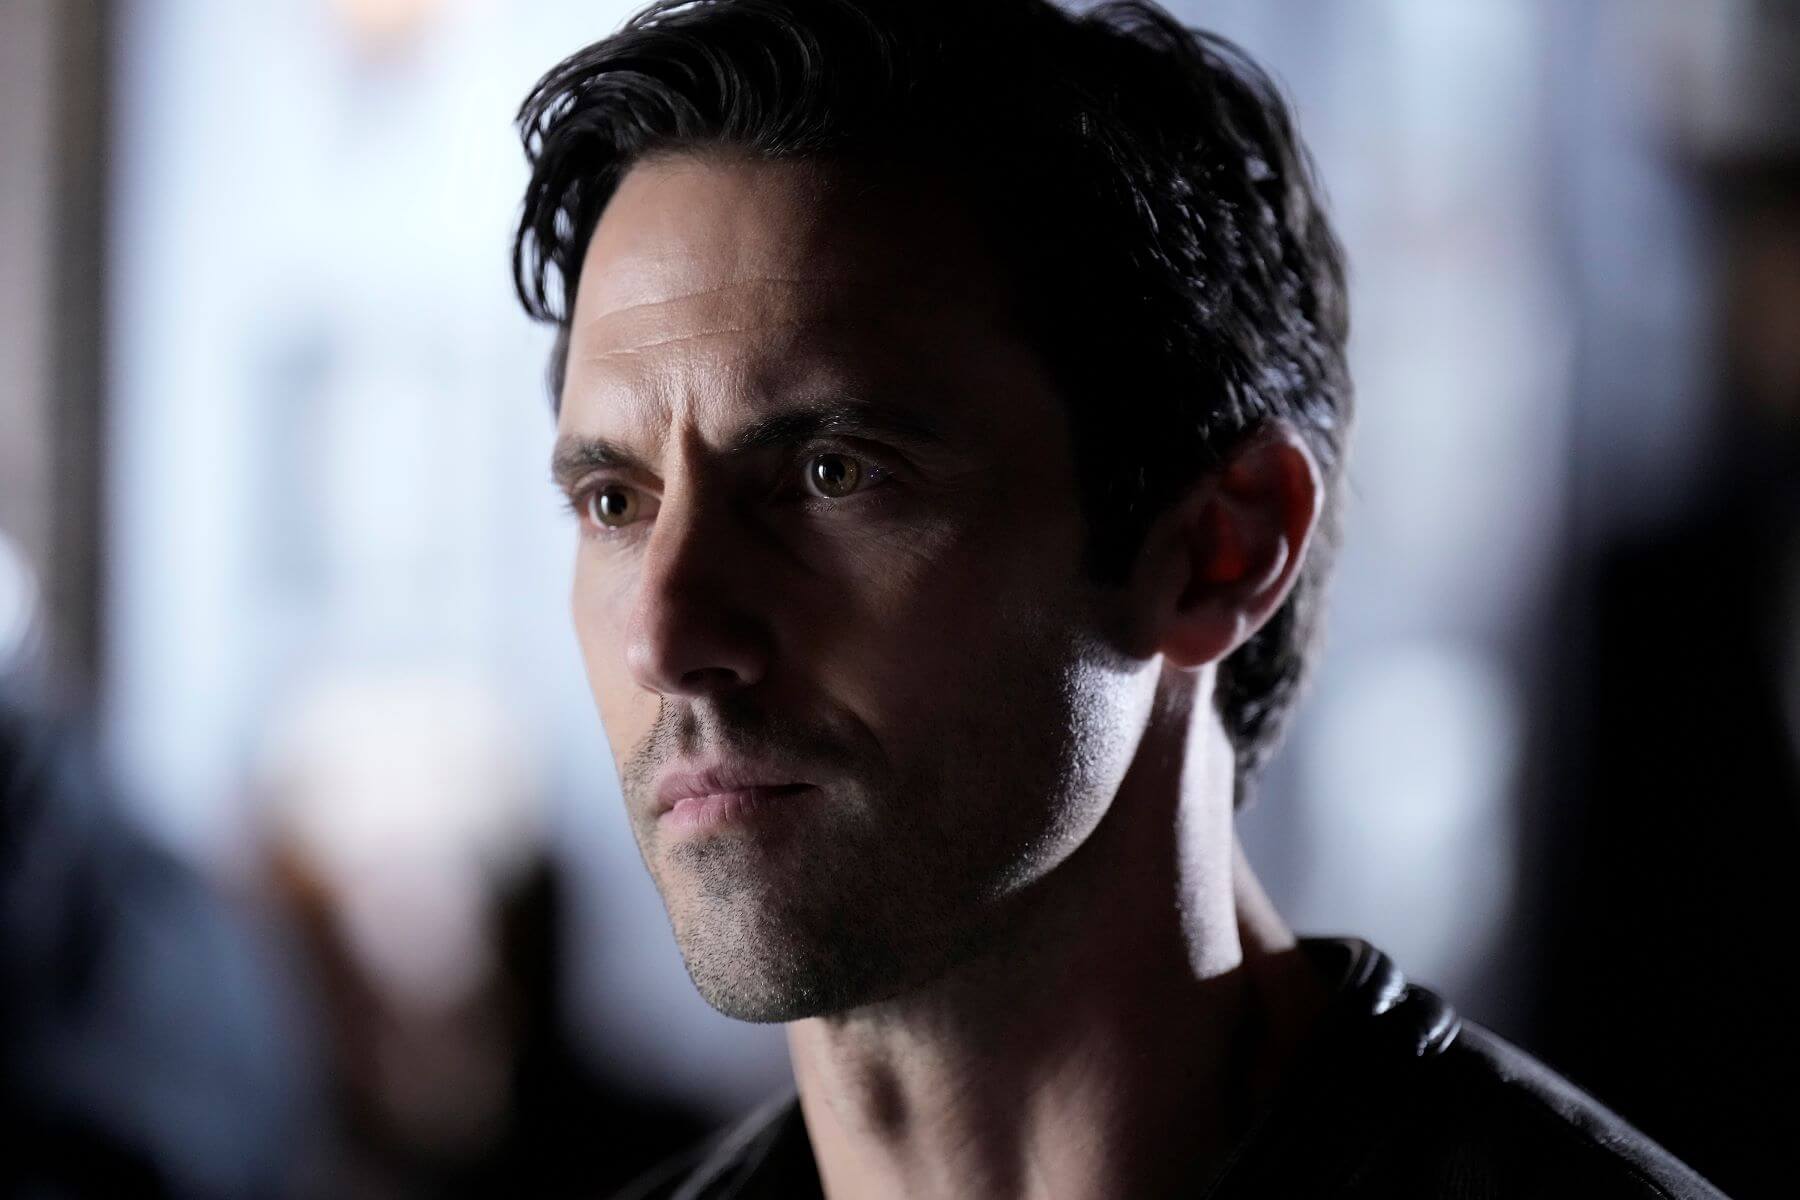 Milo Ventimiglia as Charlie Nicoletti in his new show 'The Company You Keep' on ABC wears a black leather jacket.